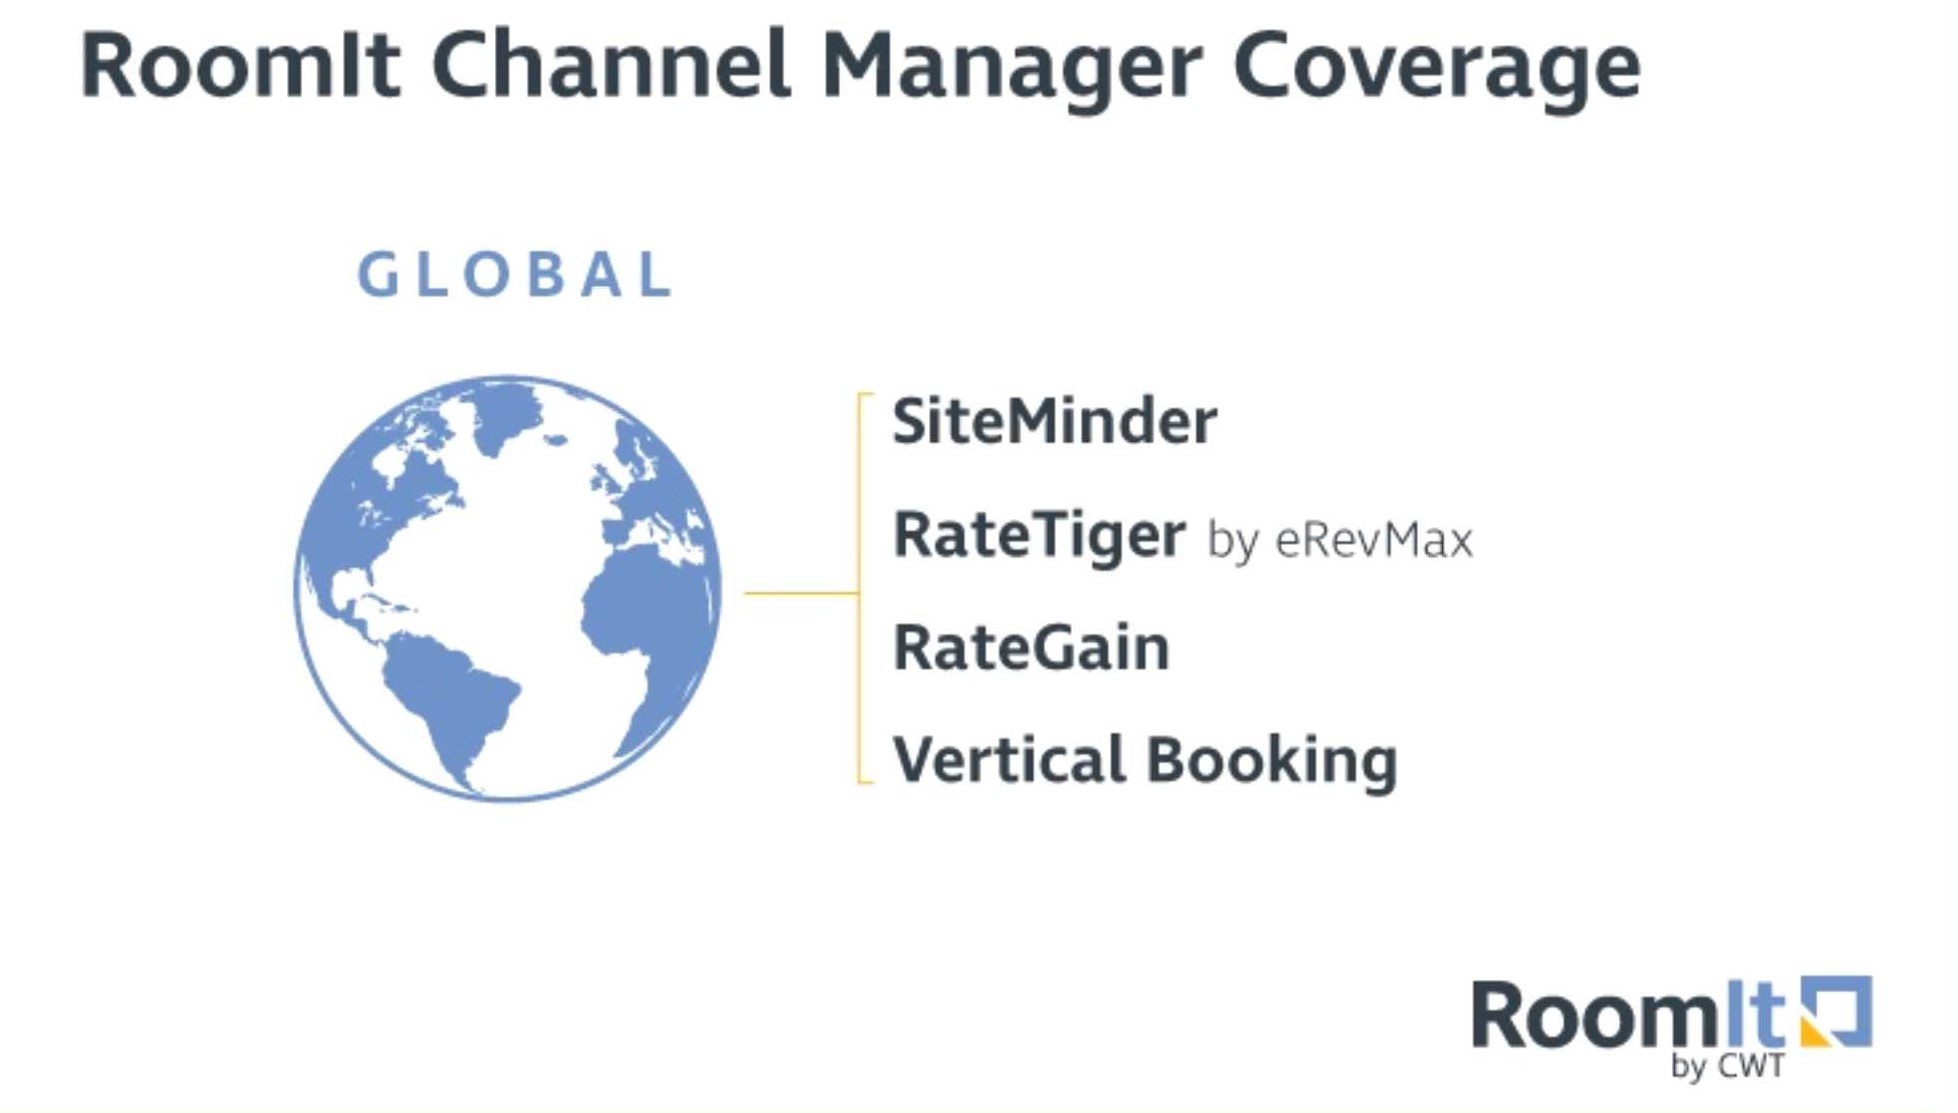 CWT has expanded its RoomIt global hotel distribution system. RateGain and RateTiger by eRevMax have joined SiteMinder and Vertical Booking as part of RoomIt’s growing channel manager program. Click to enlarge.